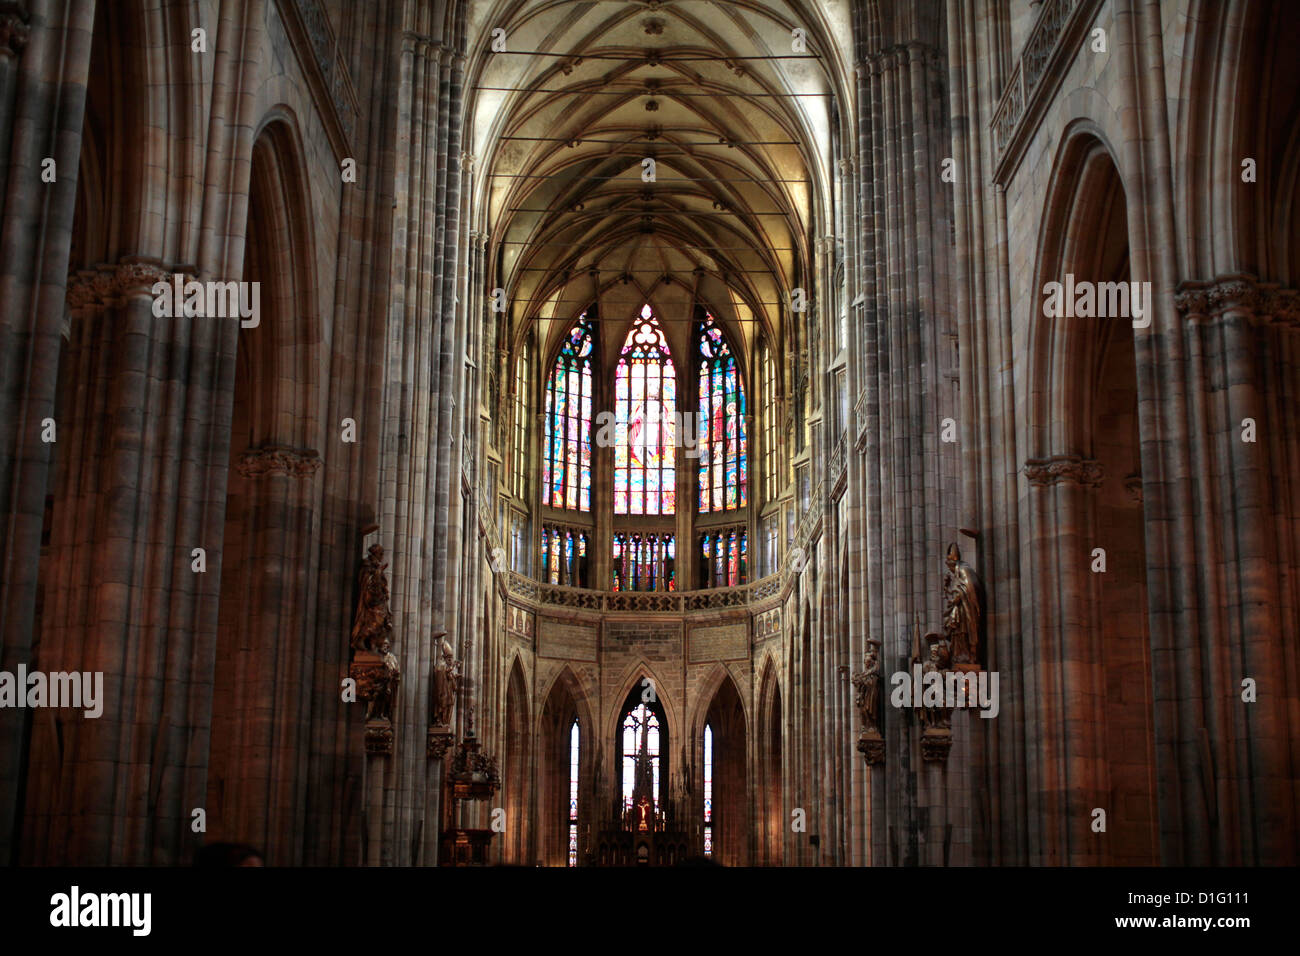 The nave of St Vitus' s Cathedral, Prague, Czech Republic, Europe Stock Photo